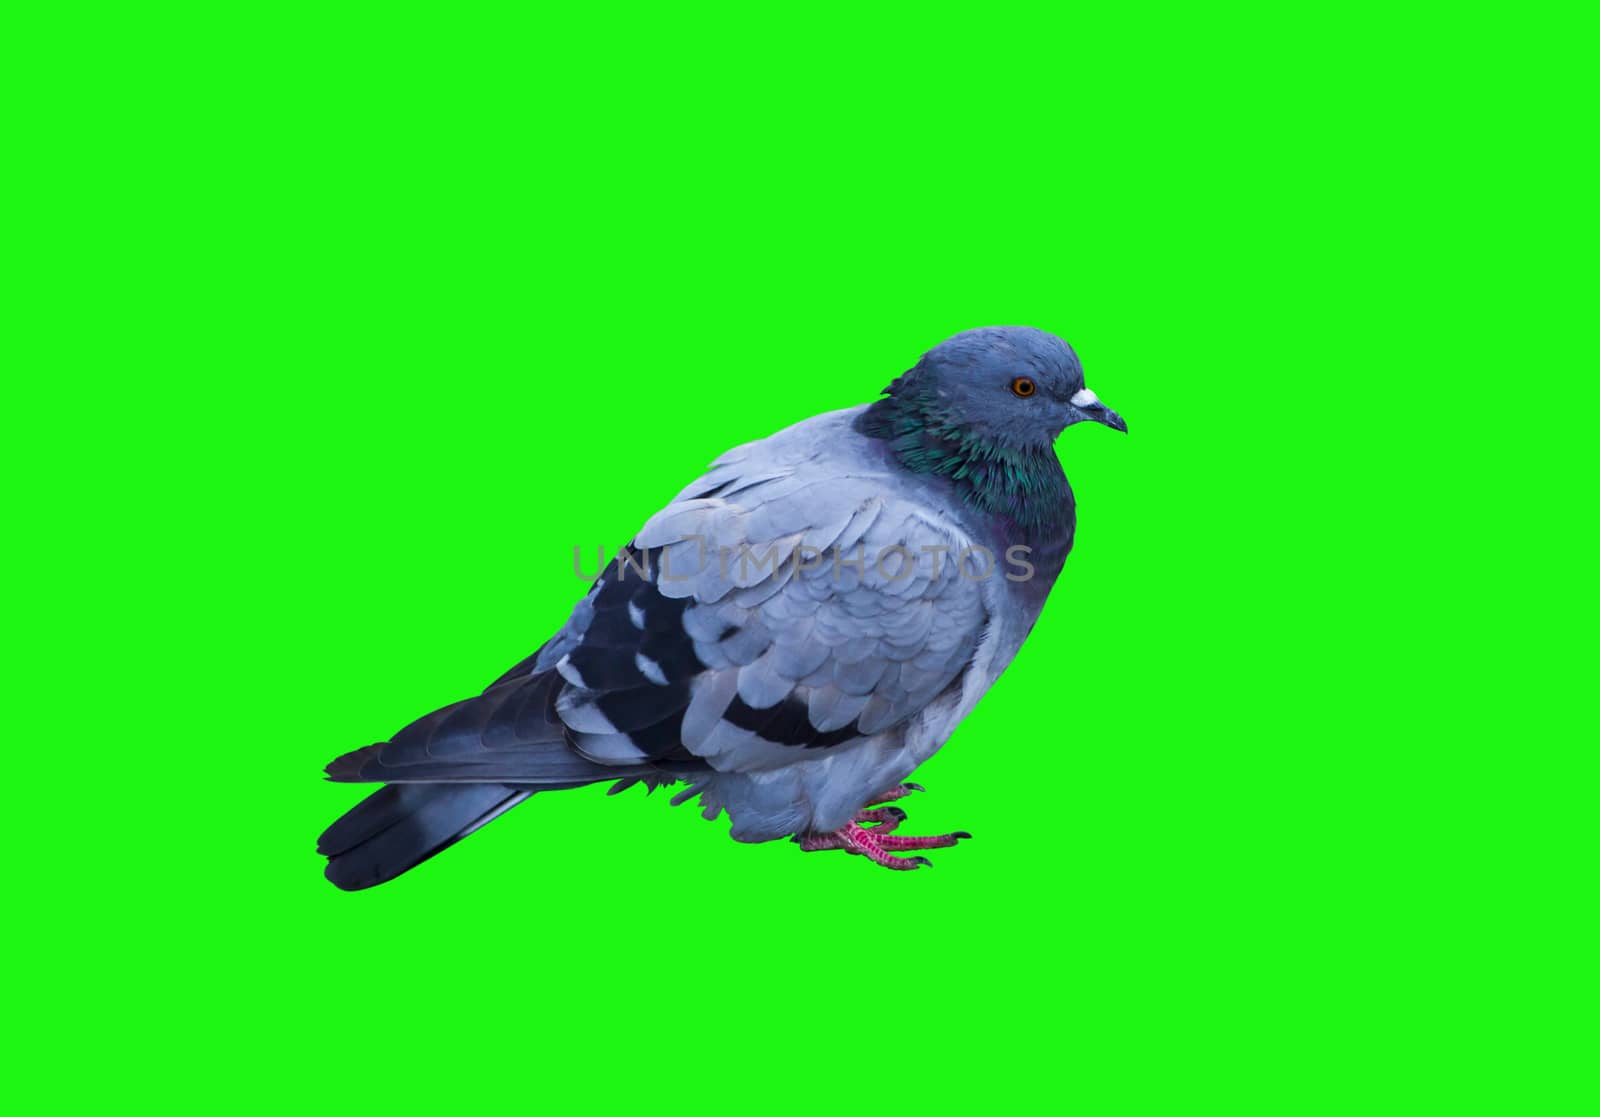 The dove is an ordinary bird on a green background. by Igor2006